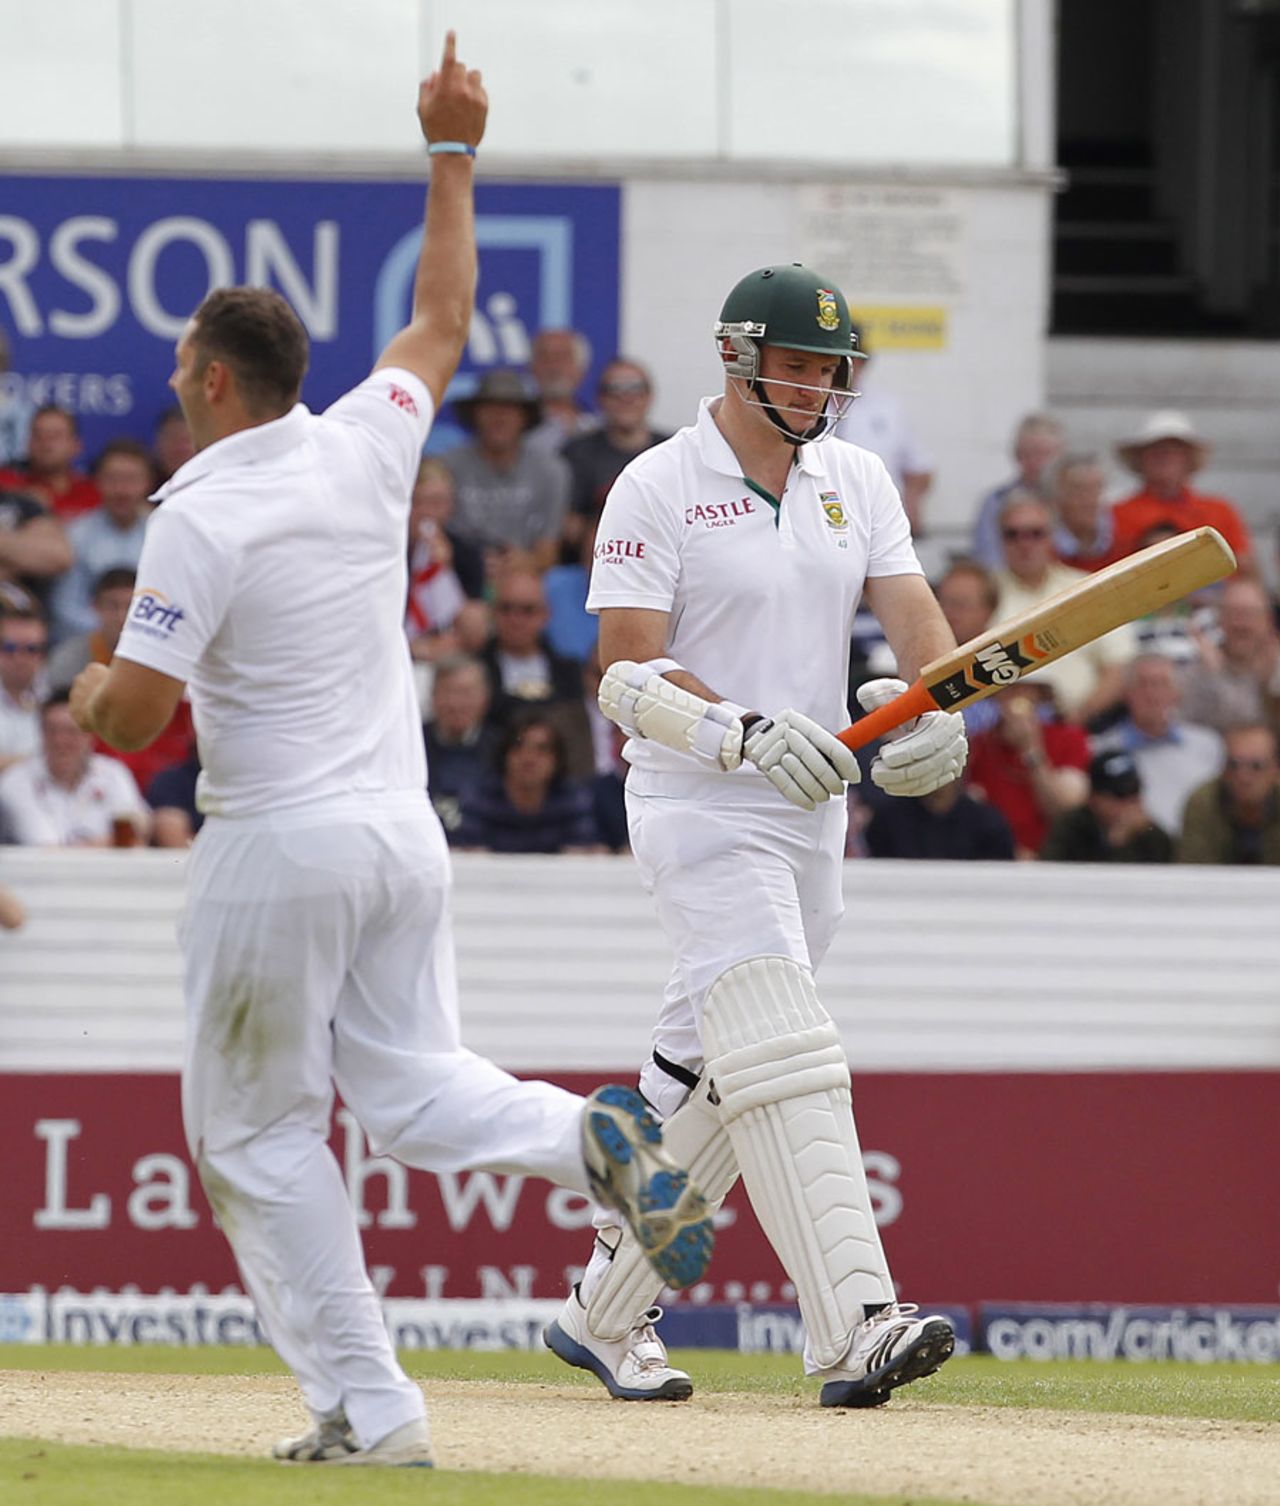 Tim Bresnan took England's first wicket in 10 hours when he removed Graeme Smith, England v South Africa, 2nd Investec Test, Headingley, 1st day, August 2, 2012